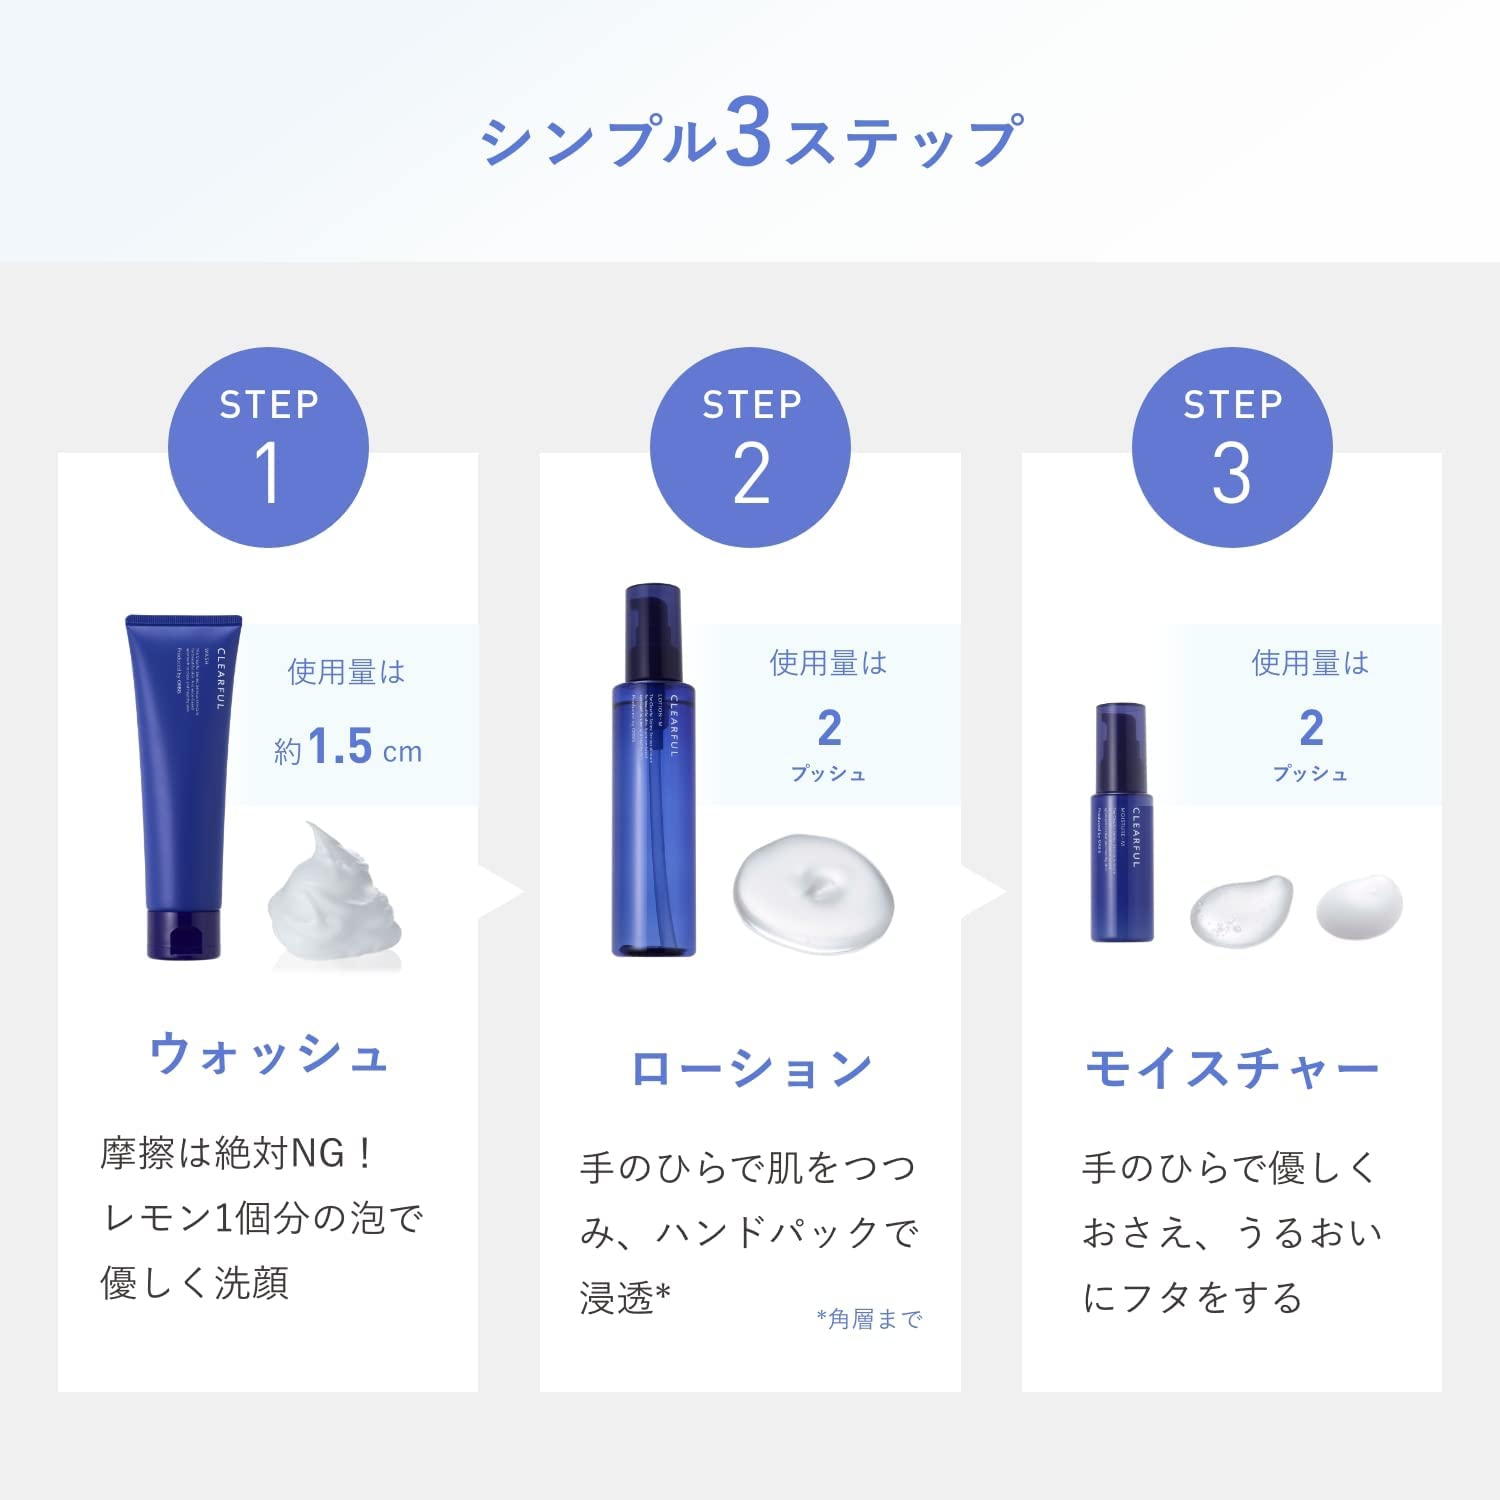 ORBIS(オルビス) クリアフル ウォッシュの商品画像サムネ9 